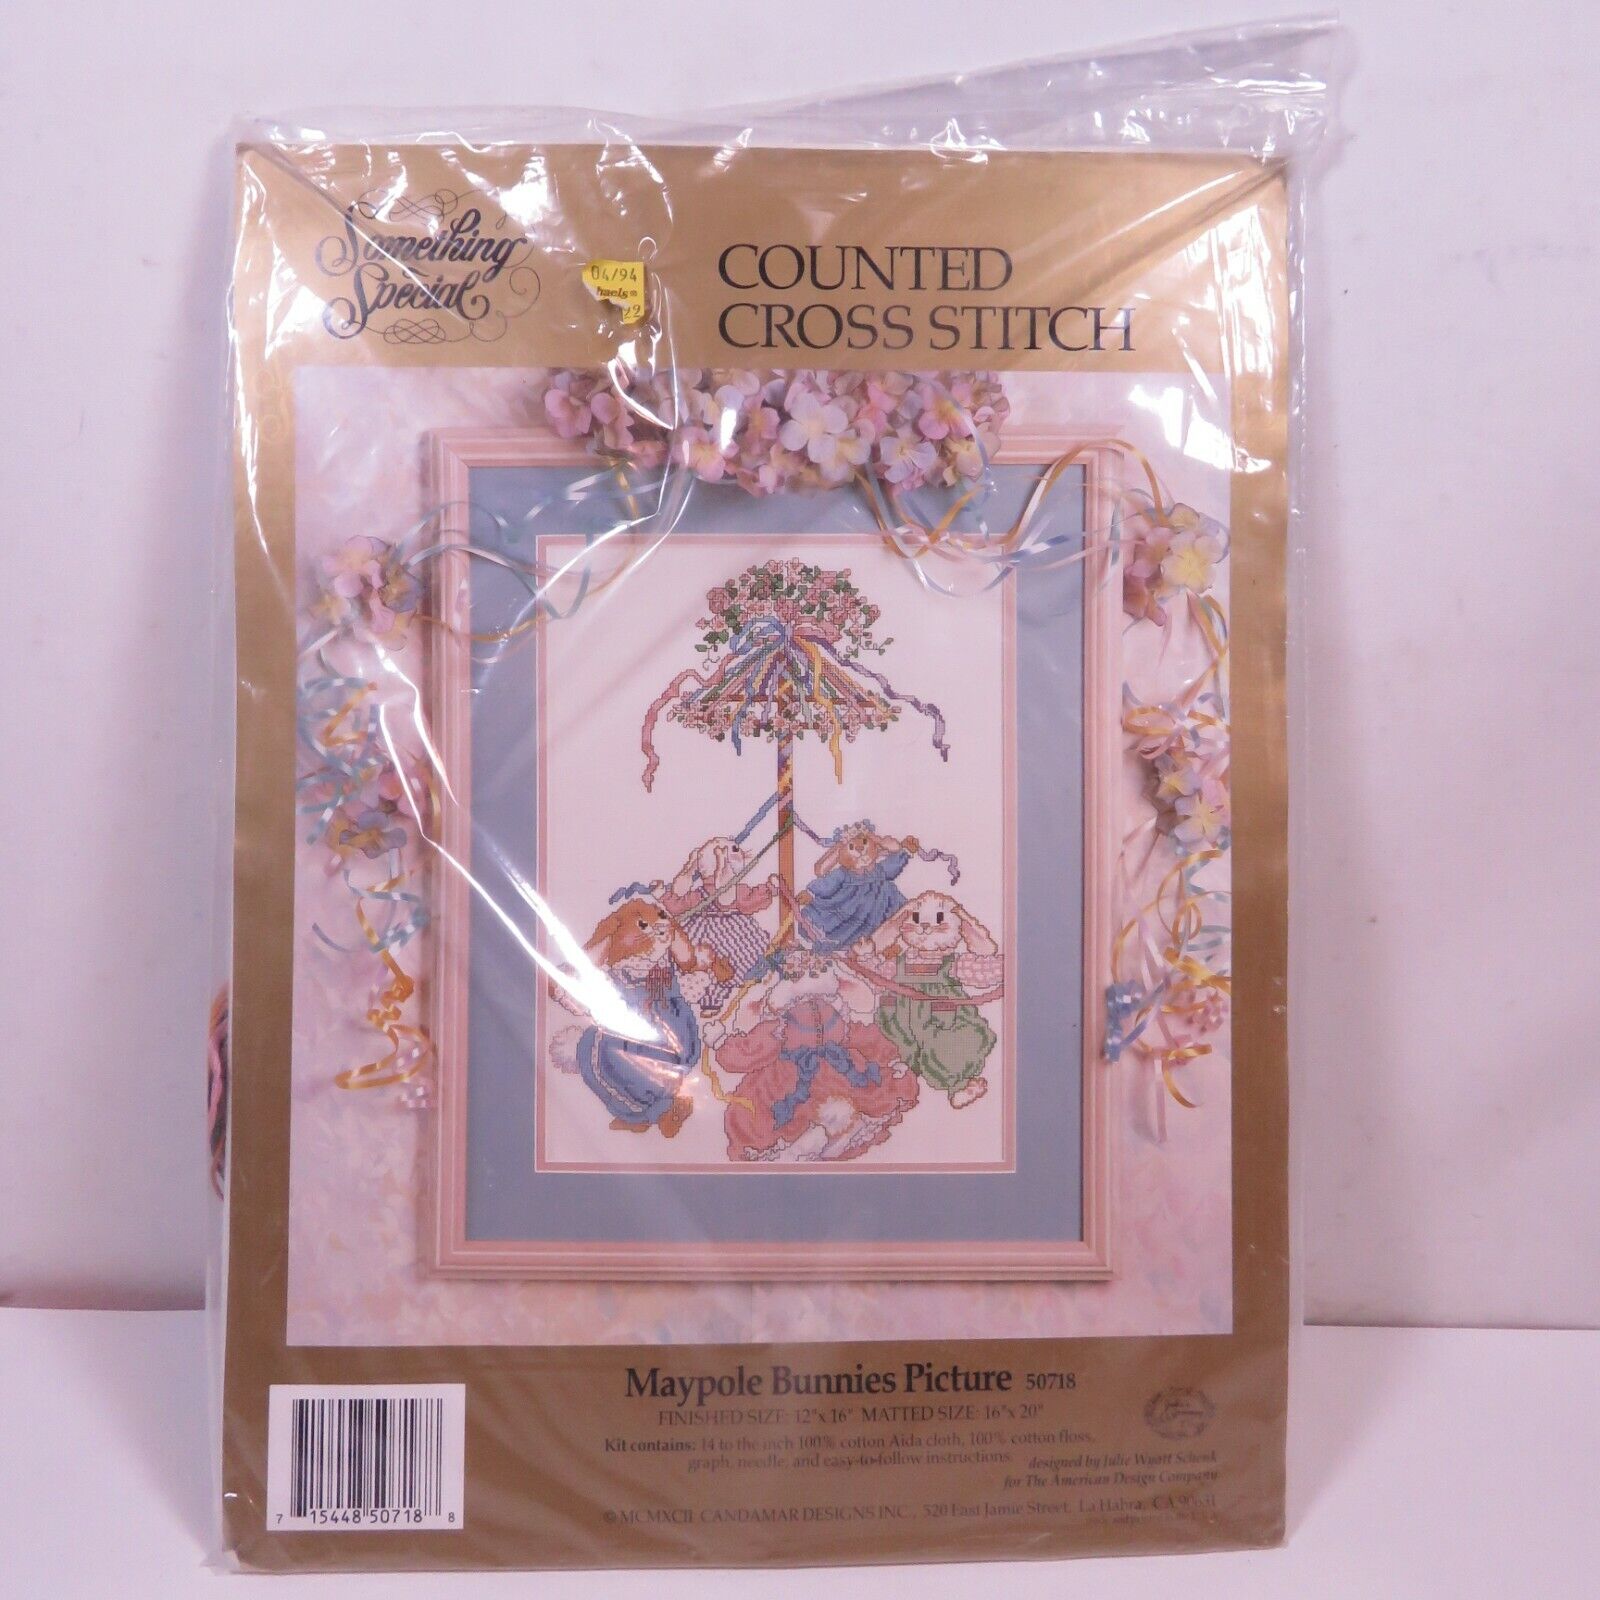 Something Special Counted Cross Stitch #50718 Maypole Bunnies Picture